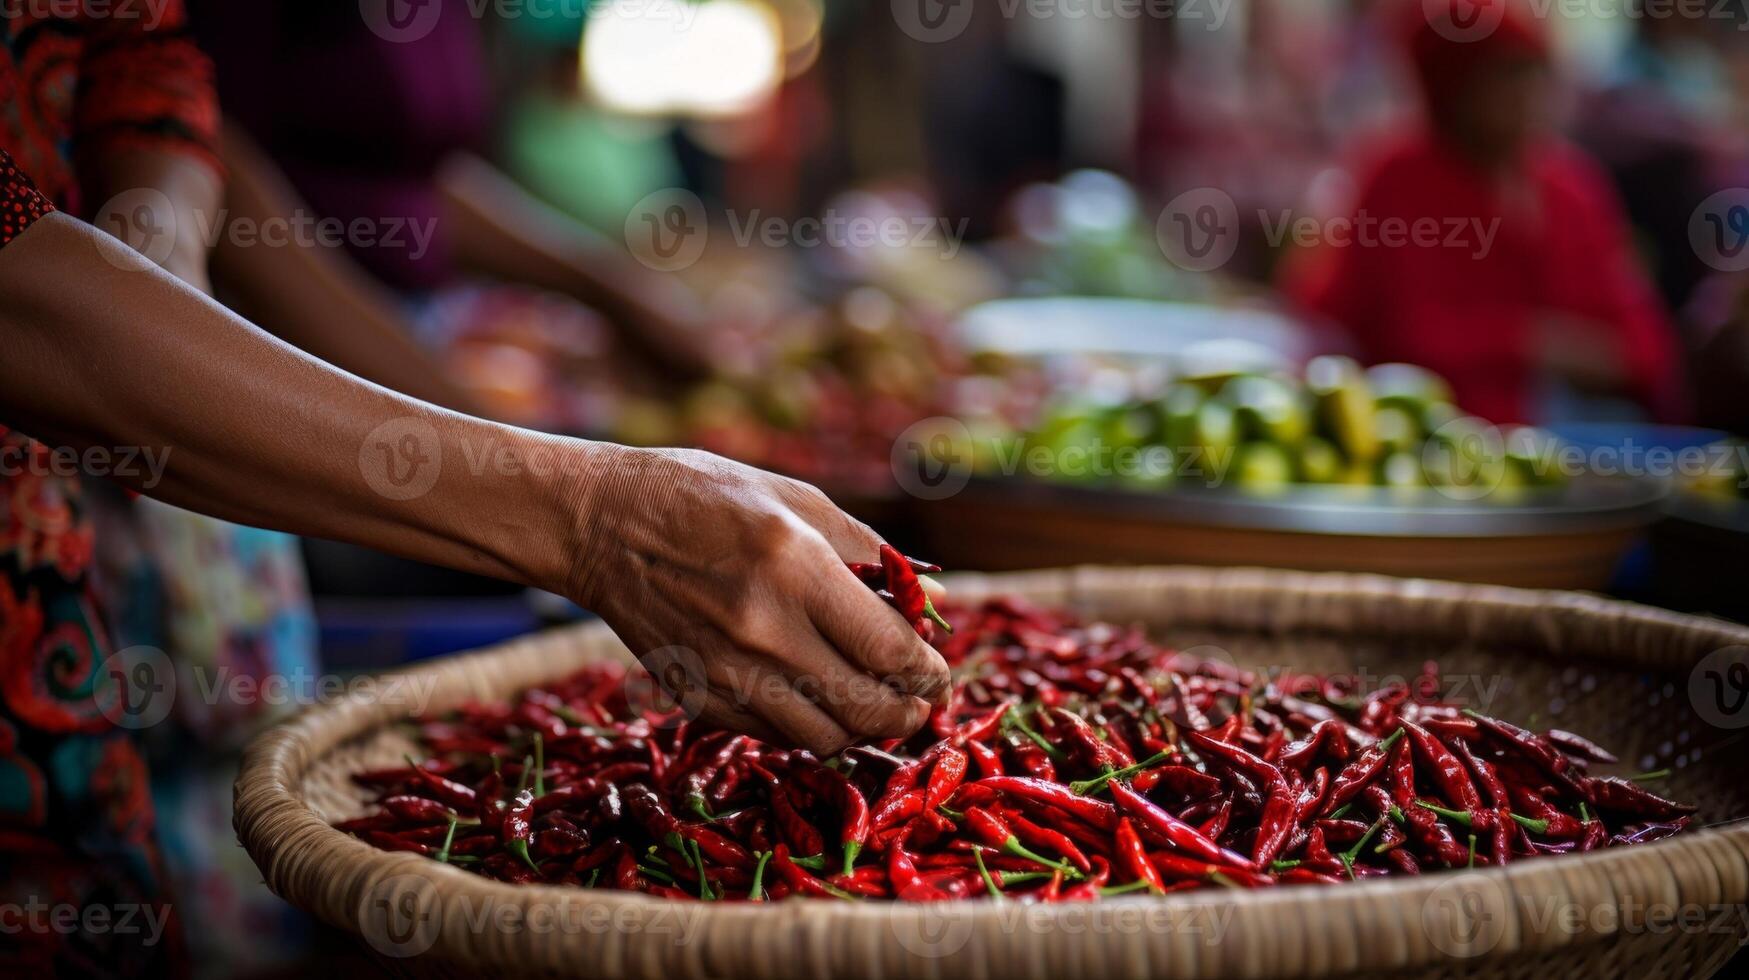 red hot chili In the vegetable market photo